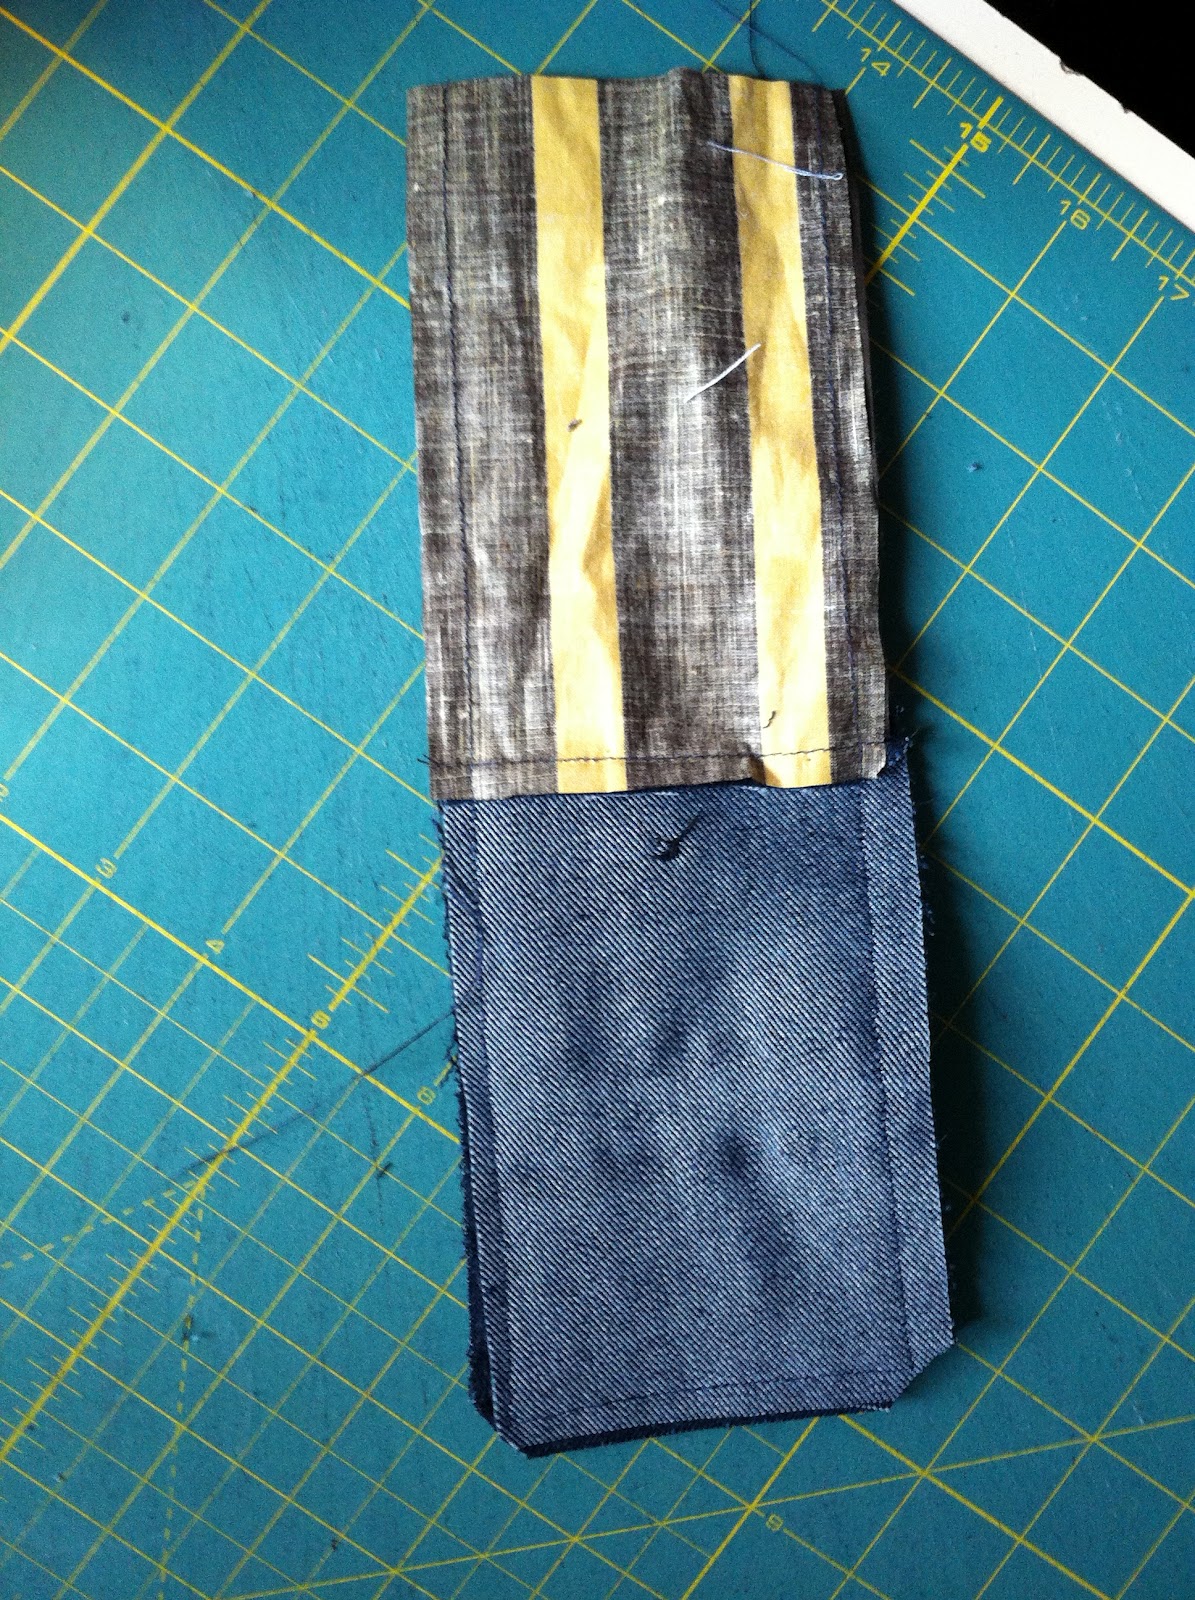 Sewing for Utange: Phone case from pockets